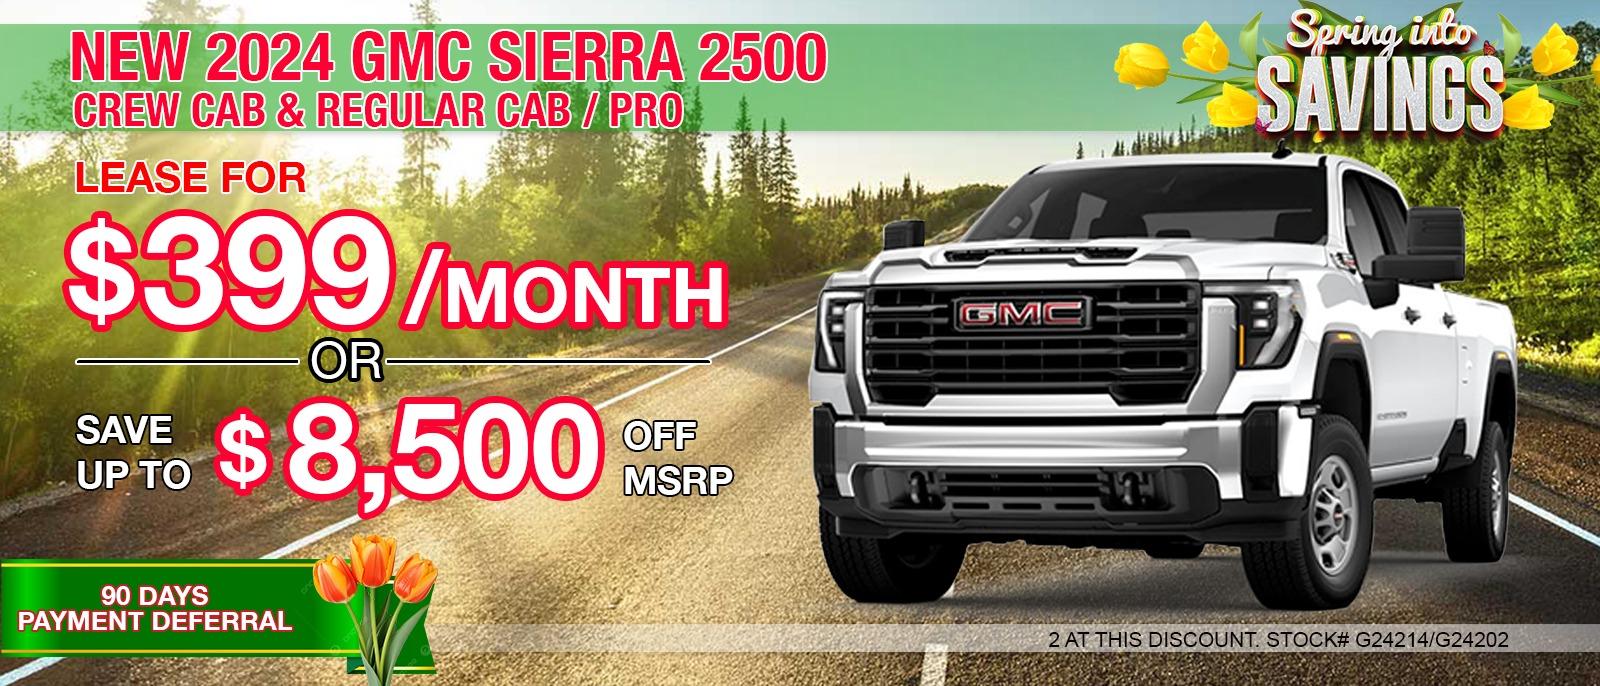 NEW 2024 GMC Sierra 2500 HD Crew Cab & Regular Cab / PRO. Your Net Savings After All Offers save up to $8,500